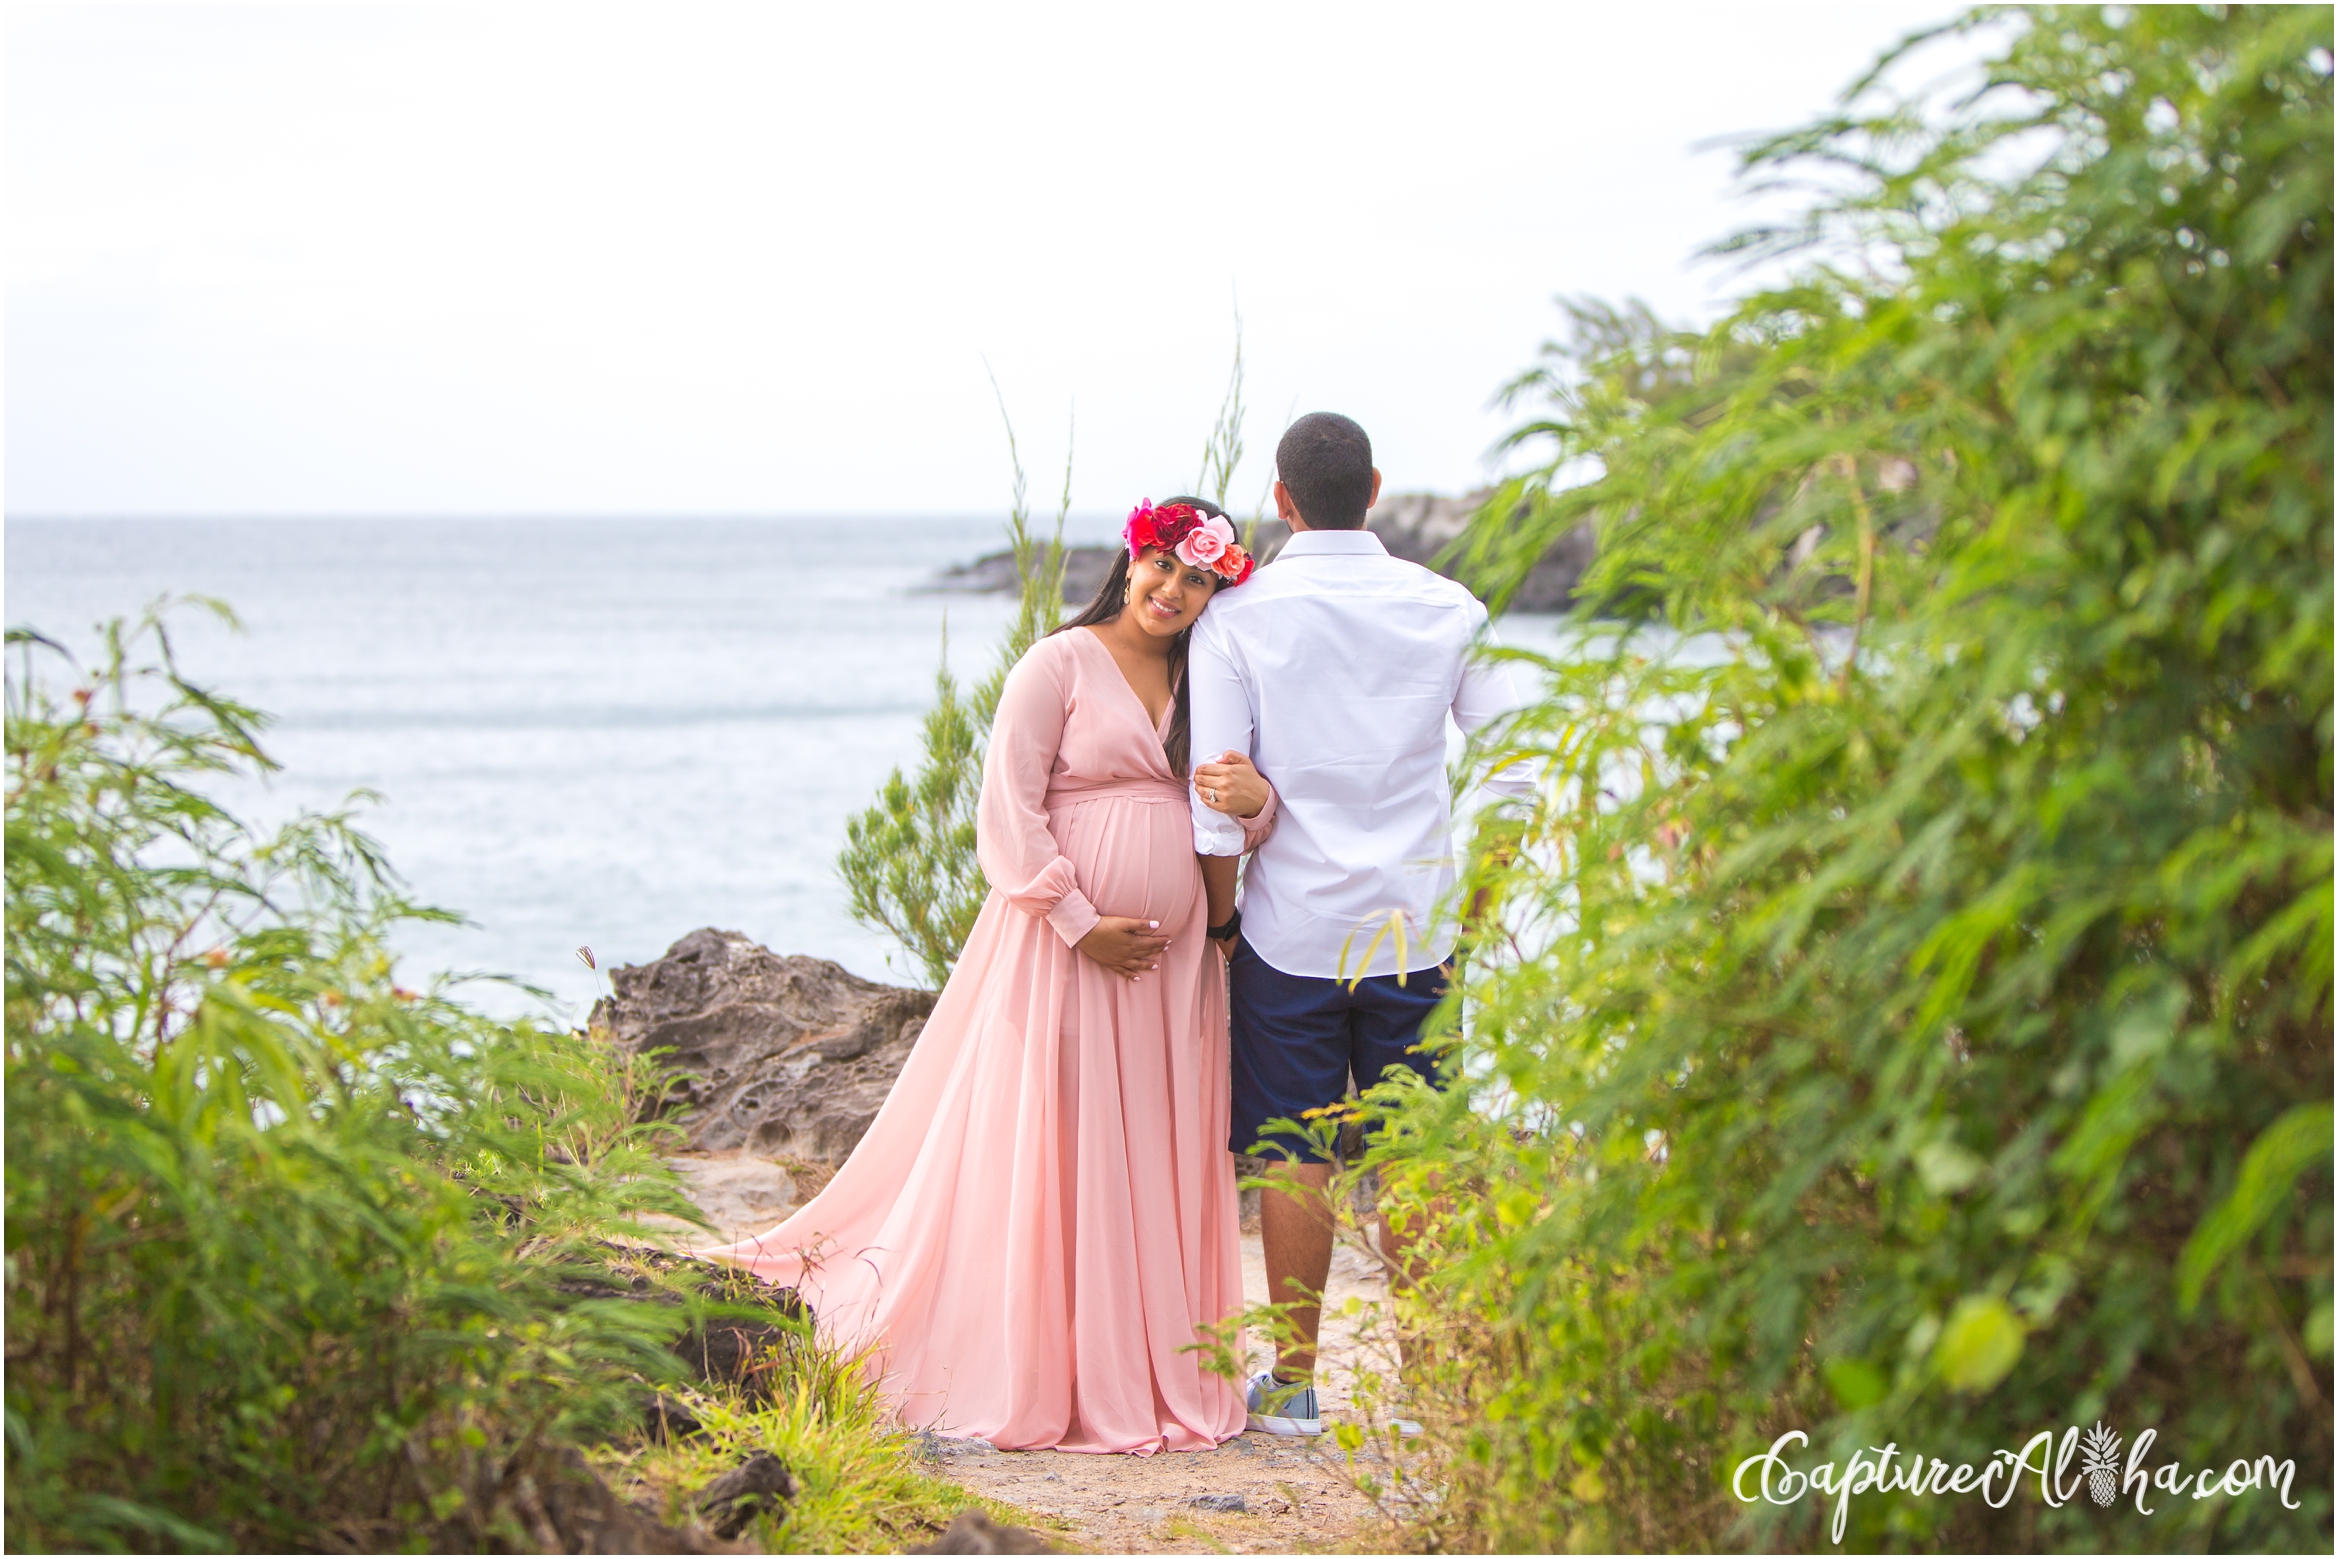 Maui Maternity Photography with couple wearing white and mom in a flower crown